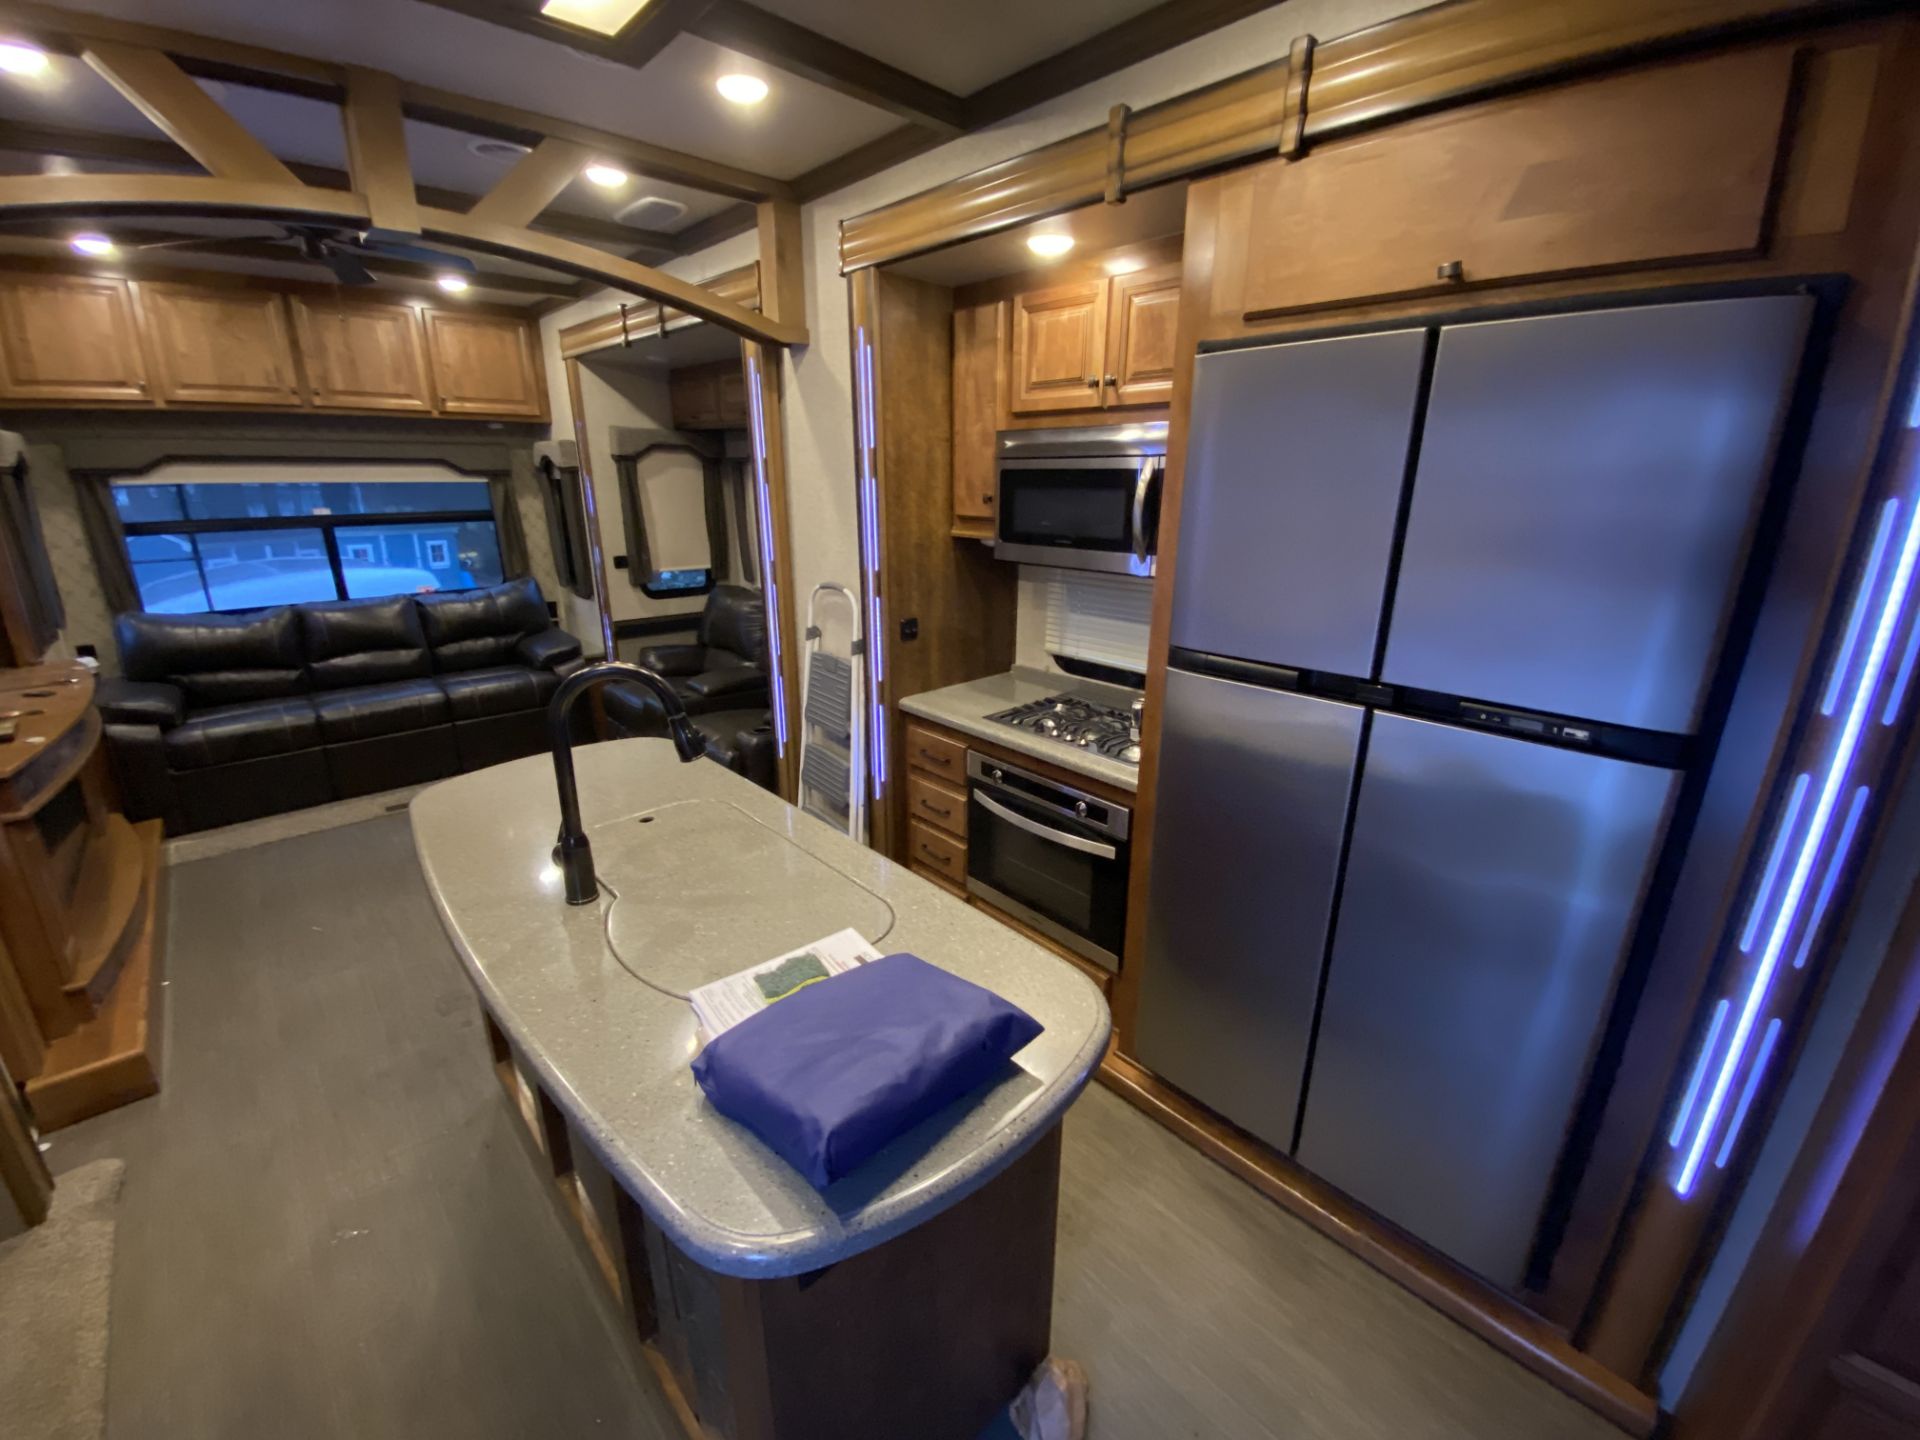 2018 Big Country 5th Wheel Camper Model 3965DSS w/4 Slide Outs - SEE VIDEO & DESCRIPTION - Image 32 of 38